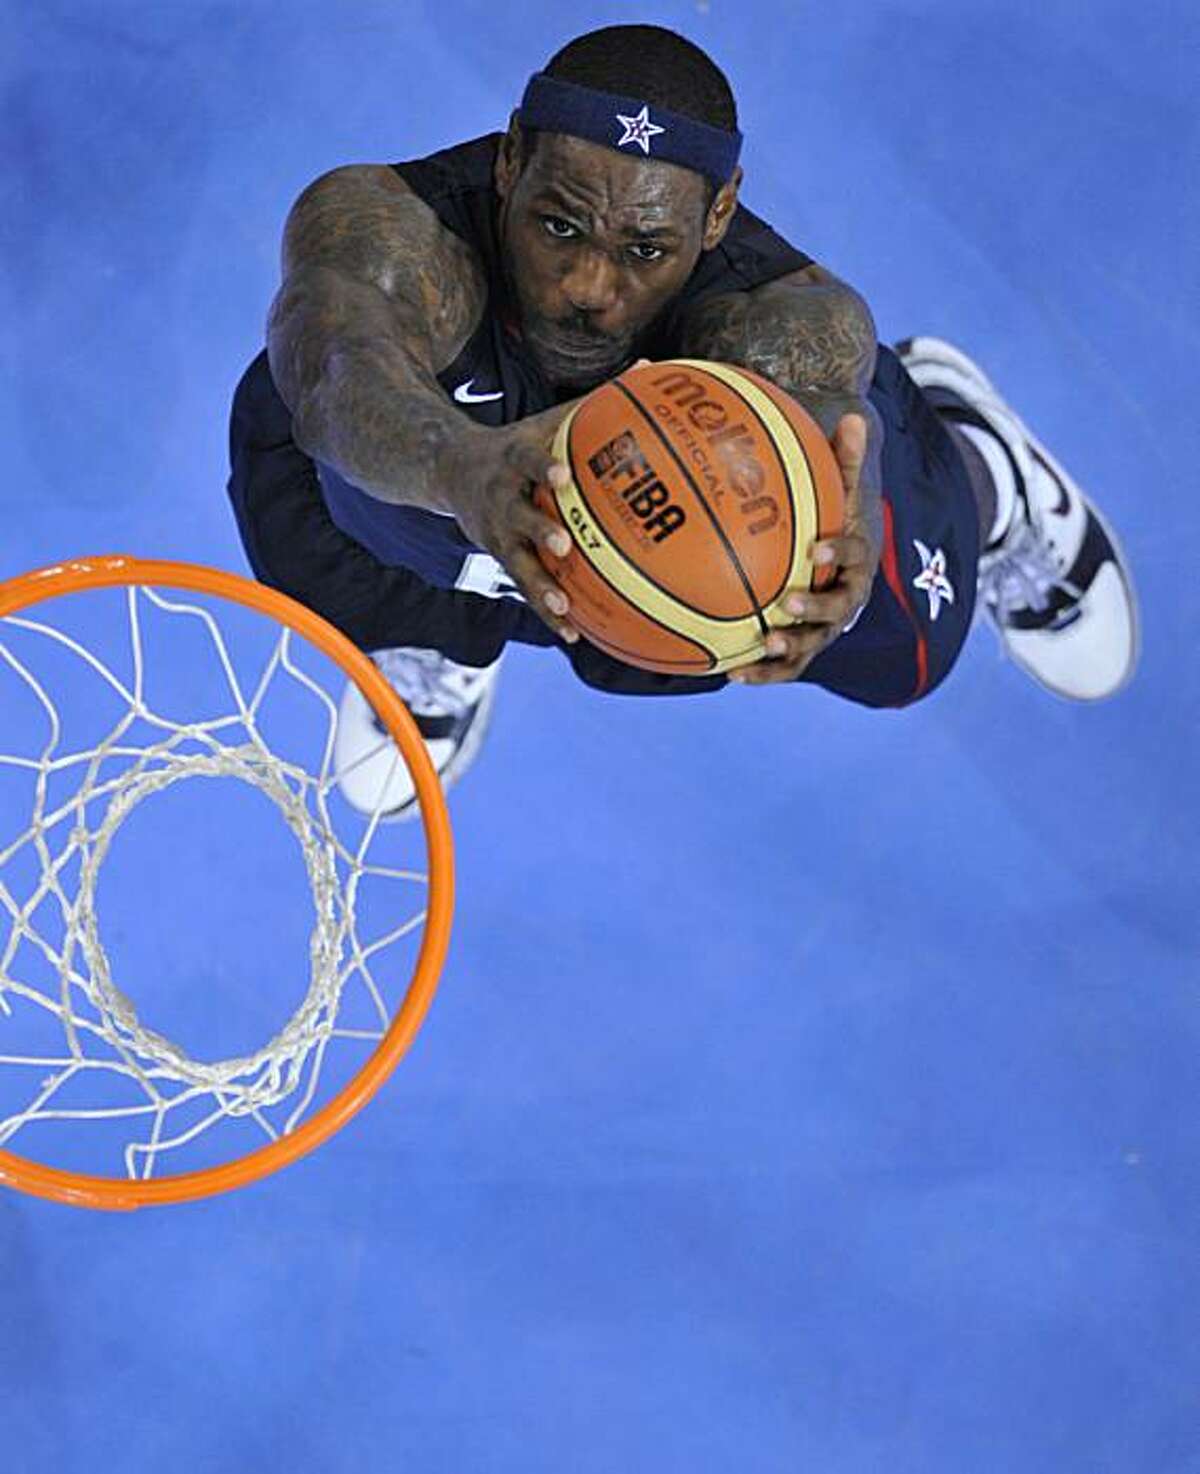 USA's LeBron James goes for a dunk during the men's basketball gold medal match Spain against The US of the Beijing 2008 Olympic Games on August 24, 2008 at the Olympic basketball Arena in Beijing. The United States won the Olympic men's basketball gold medal defeating Spain 118-107. Argentina defeated Lithuania 87-75 in the bronze-medal game. AFP PHOTO / FILIPPO MONTEFORTE (Photo credit should read FILIPPO MONTEFORTE/AFP/Getty Images)